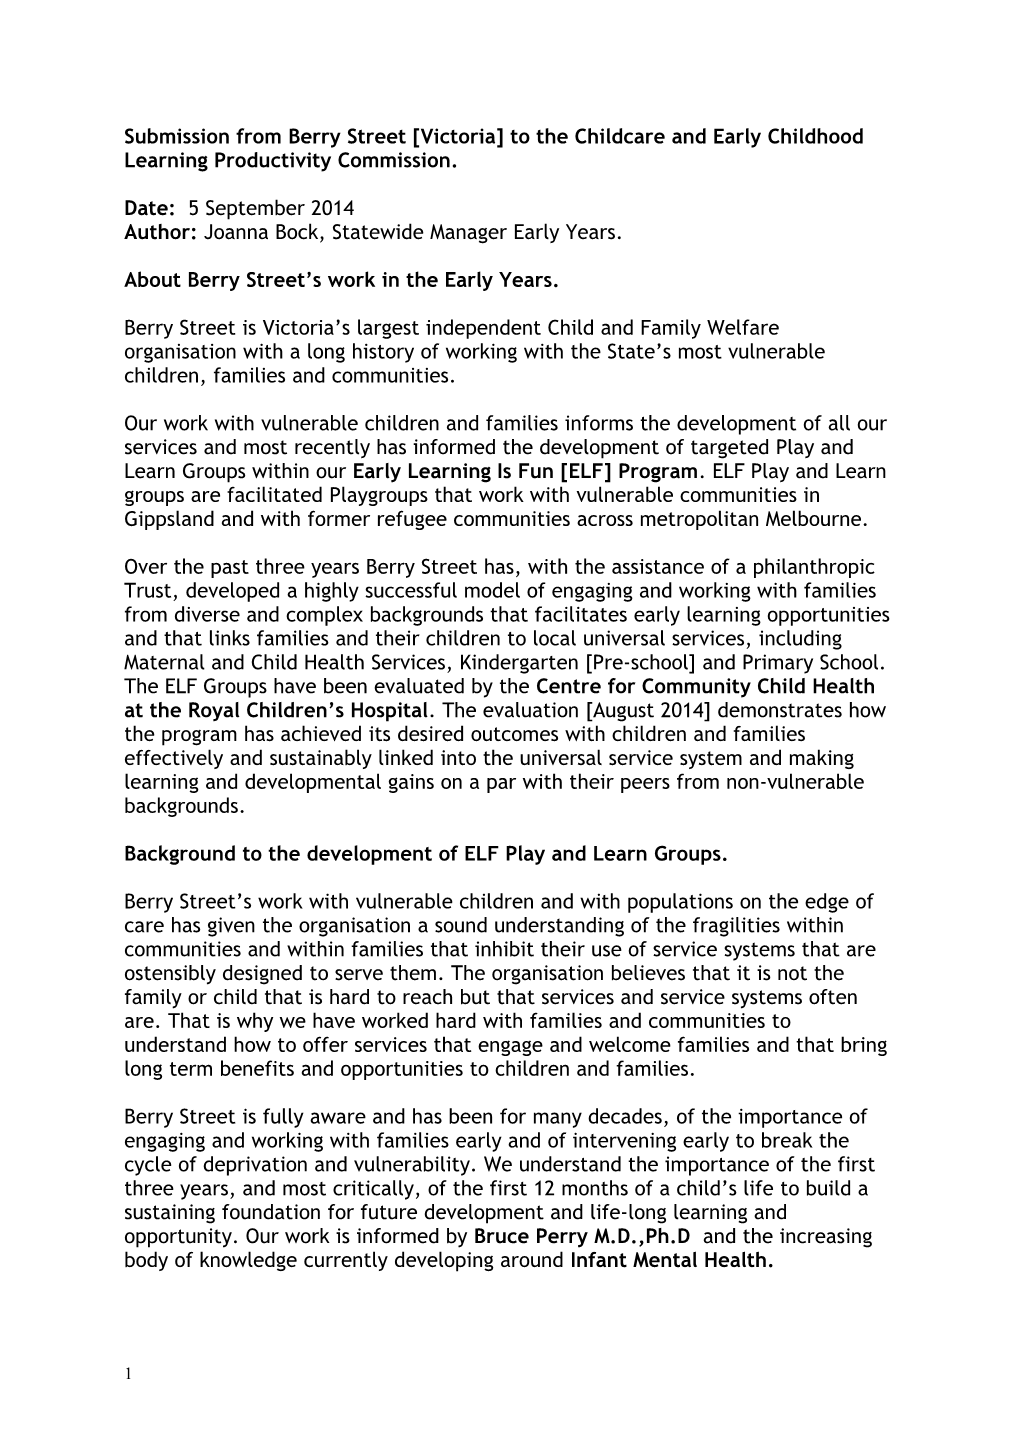 Submission DR781 - Berry Street - Childcare and Early Childhood Learning - Public Inquiry